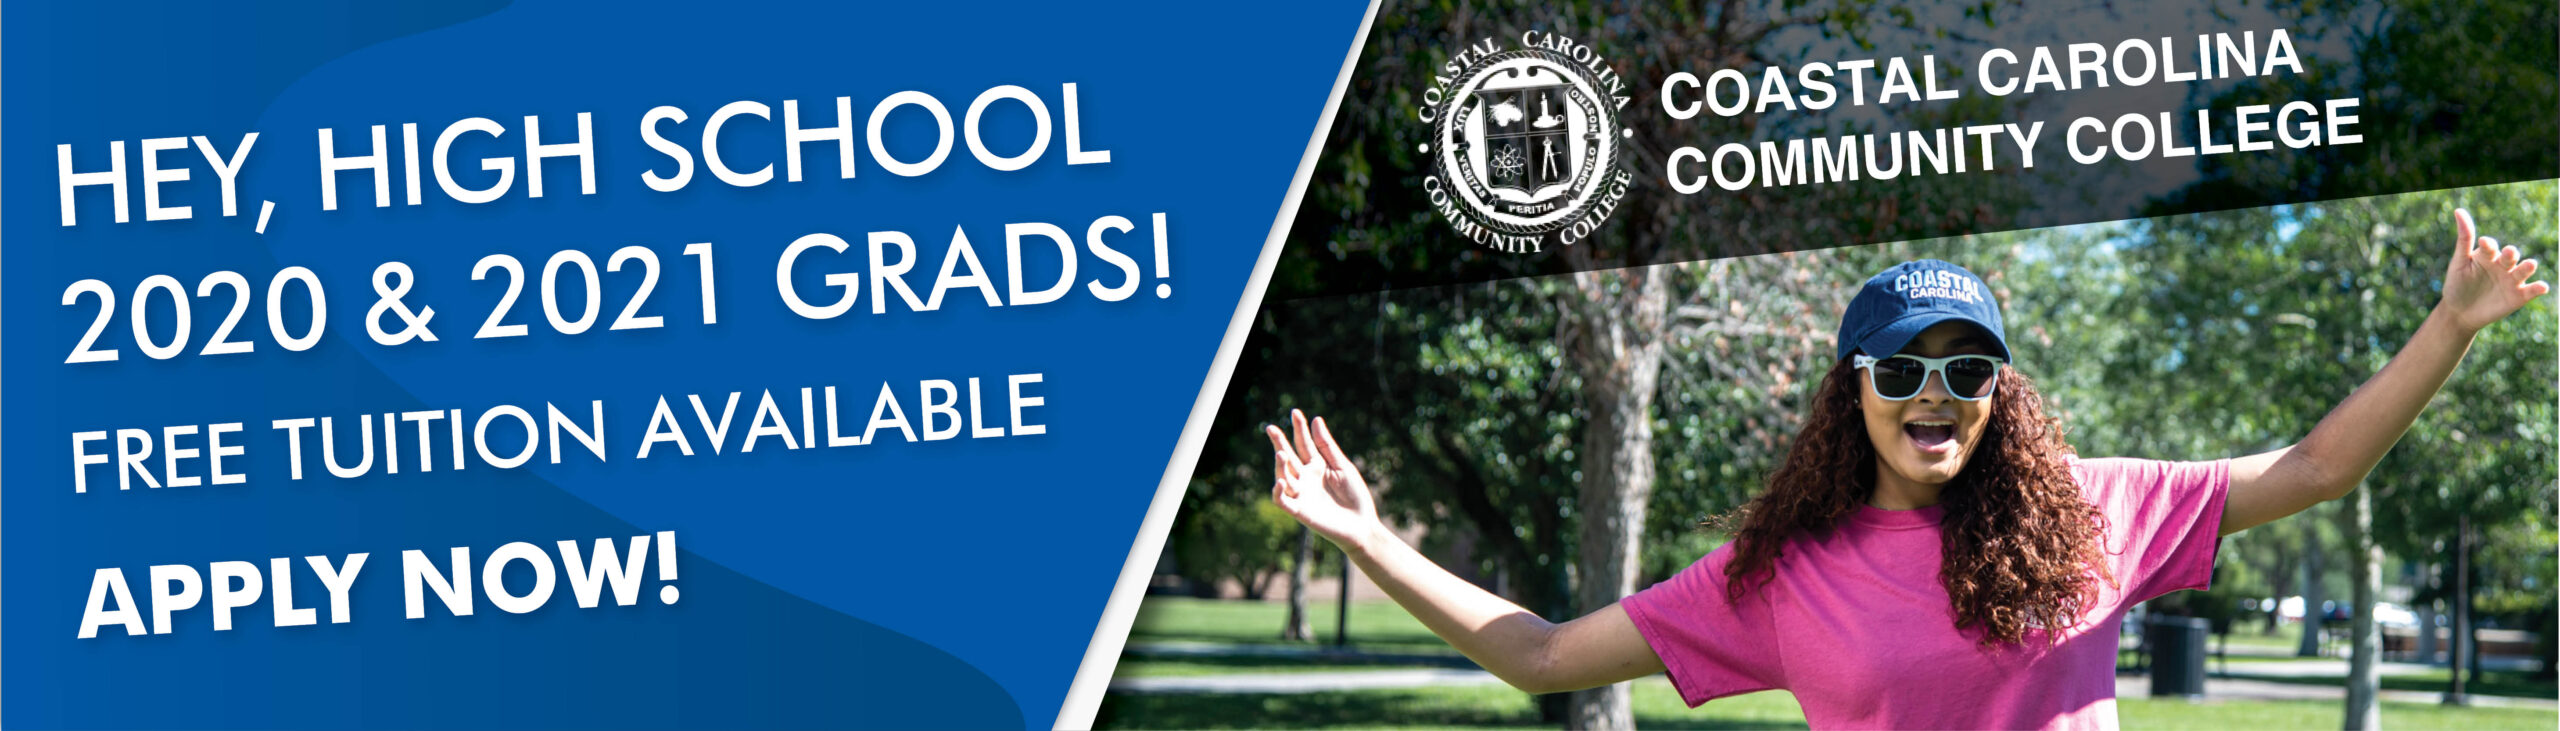 Hey, High School 2020 & 2021 Grads! Free Tuition Available | Apply Now!